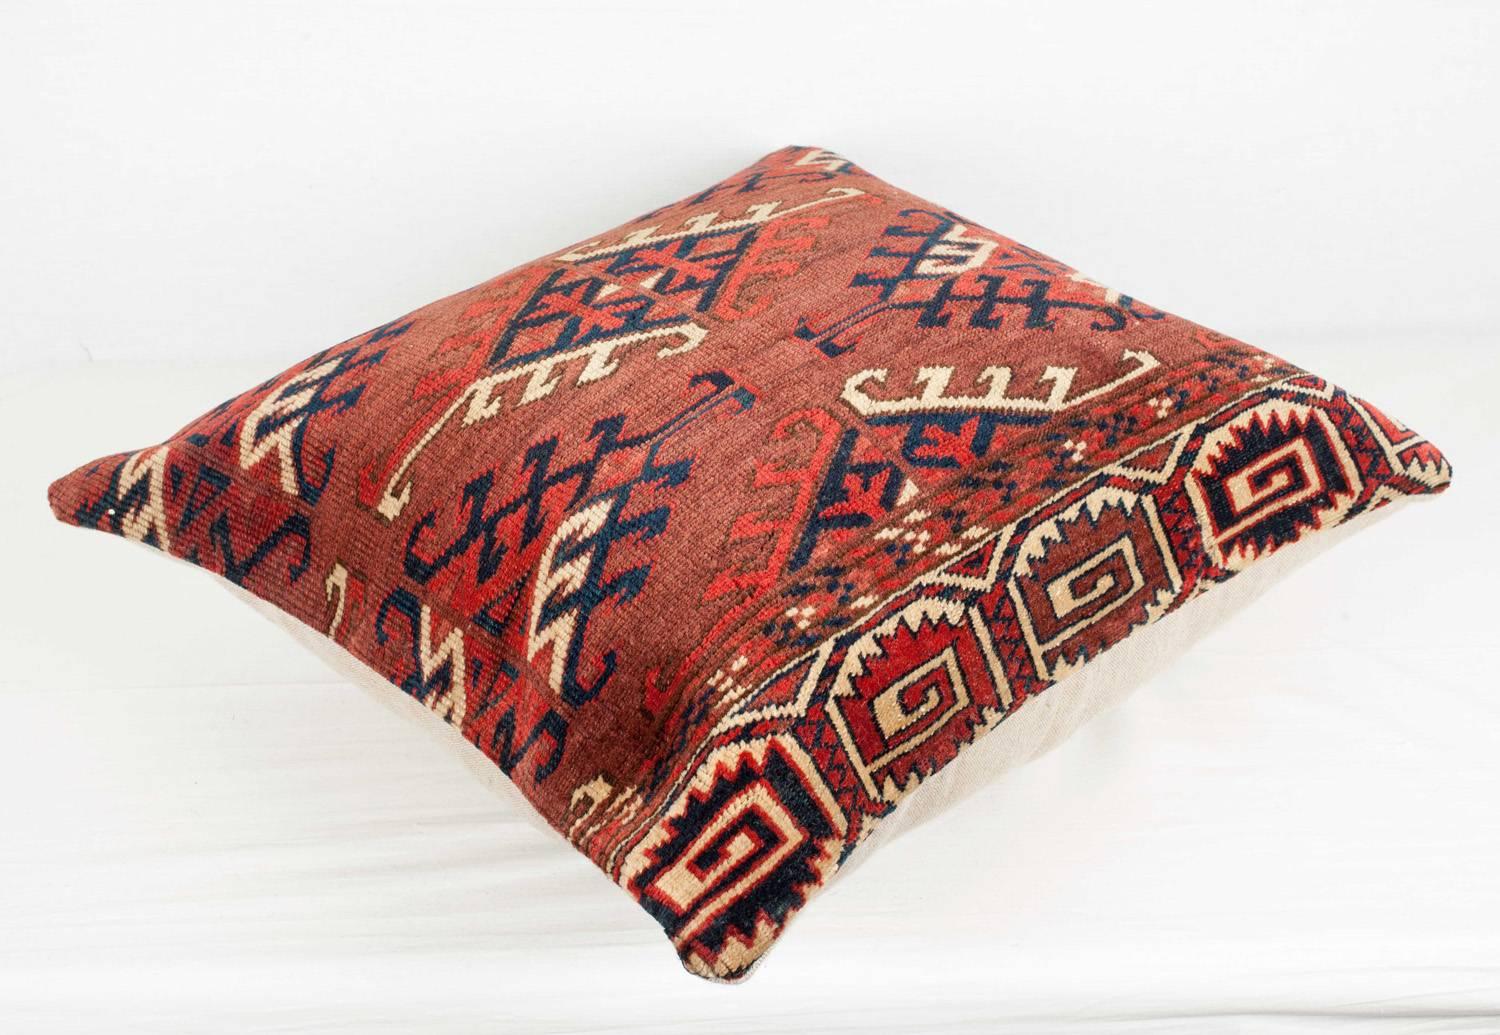 A pillow fashioned from a colorful Yomut Turkmen/Turkoman tribal bag.  The colors are all derived from natural dyes and the condition is good, with no holes, repair or stains.

It comes with an insert to accomodate the filling.
FILLING NOT